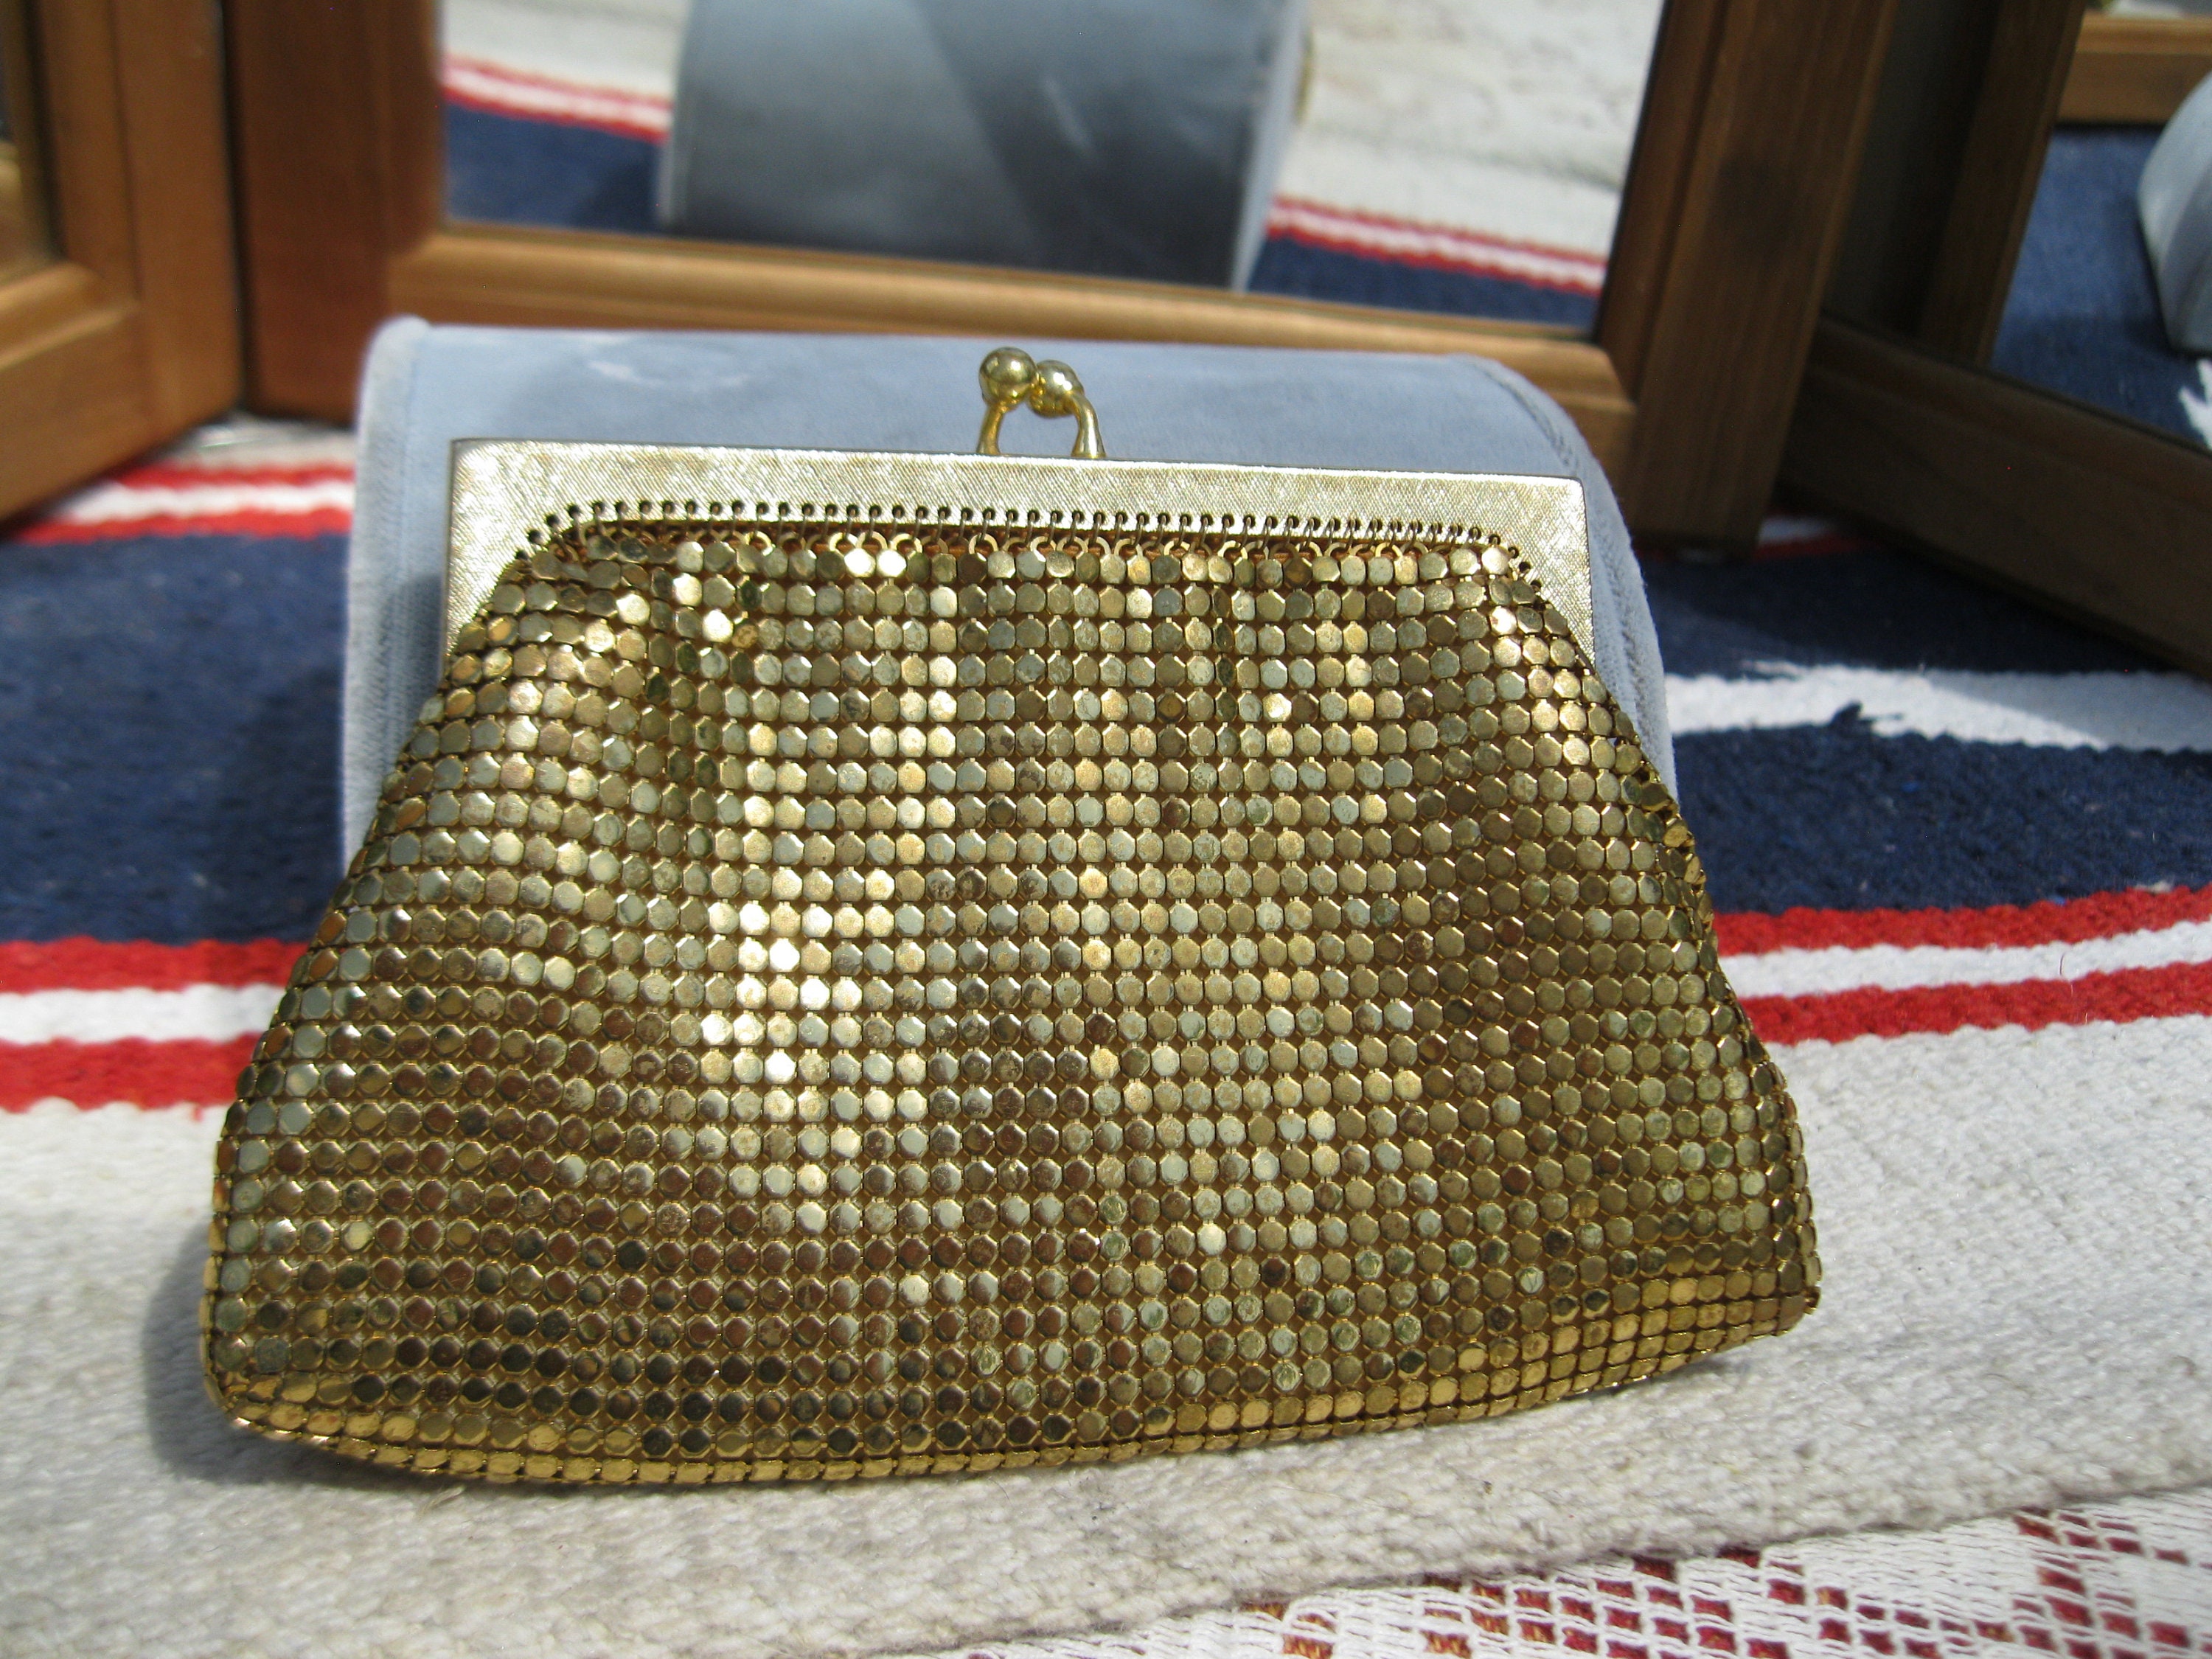 Vintage Whiting & Davis Gold Mesh Purse Made In USA • PreAdored®  Sustainable Luxury